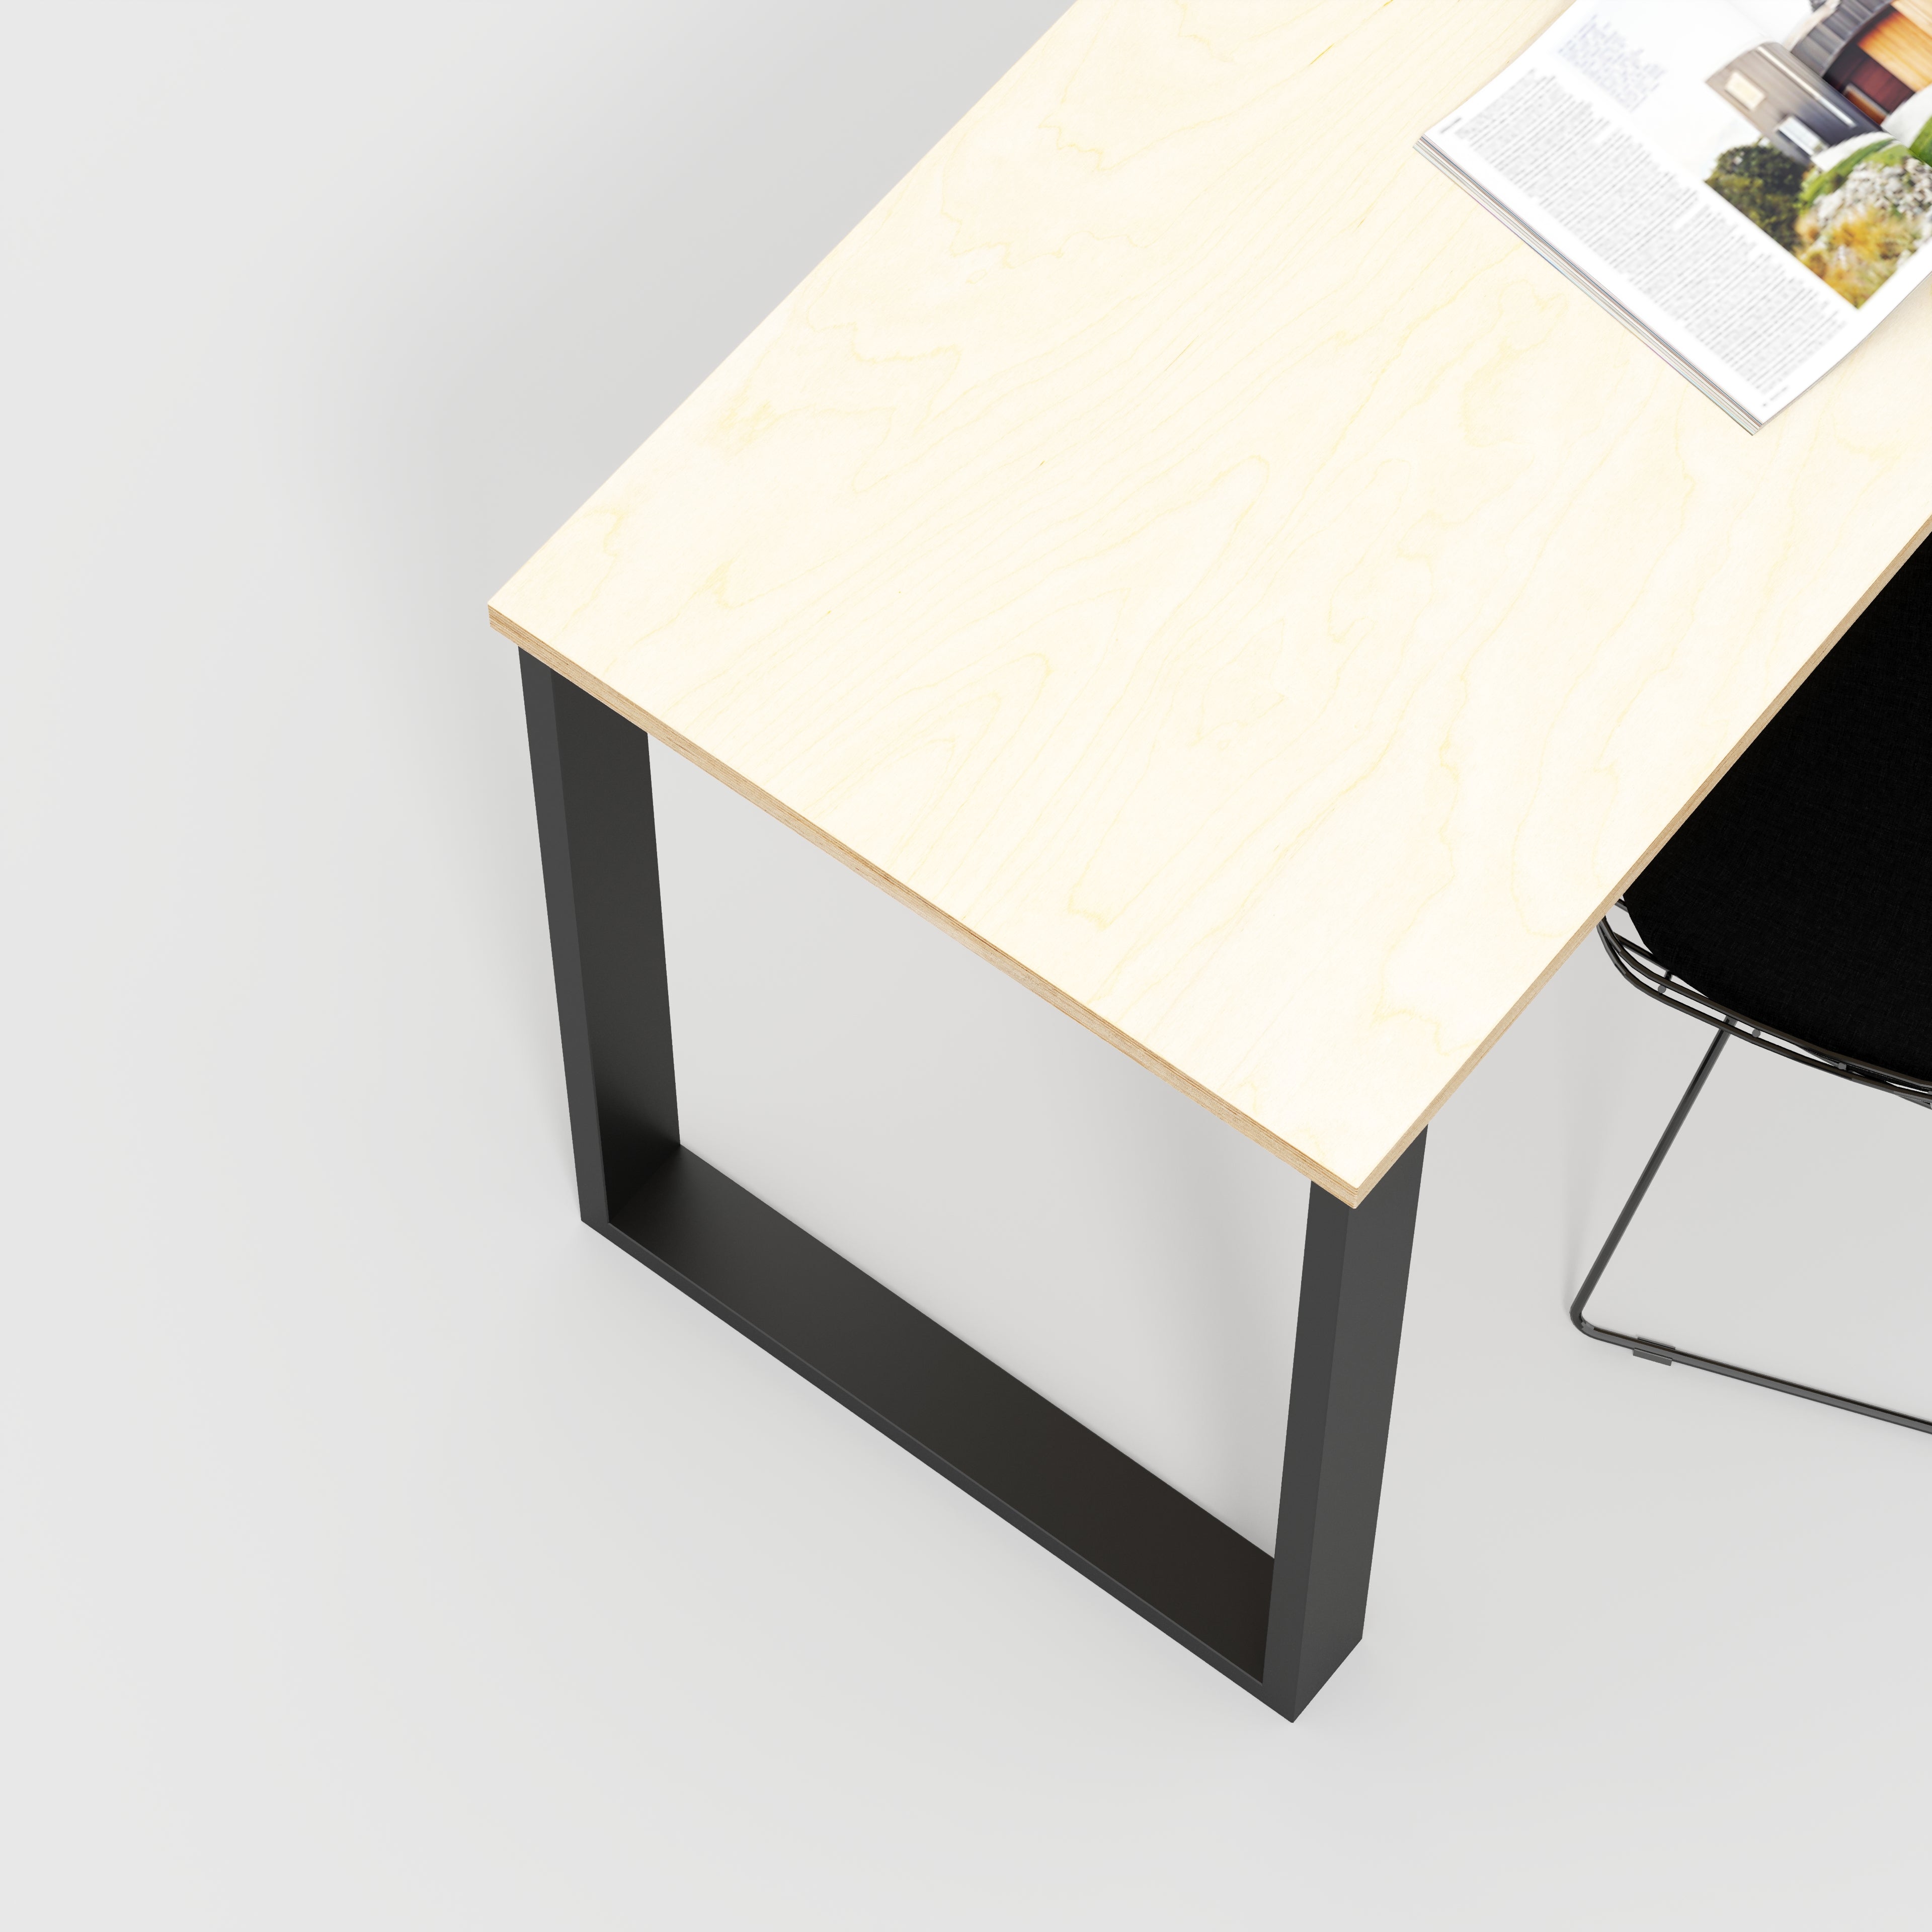 Custom Plywood Desk with Square Industrial Legs